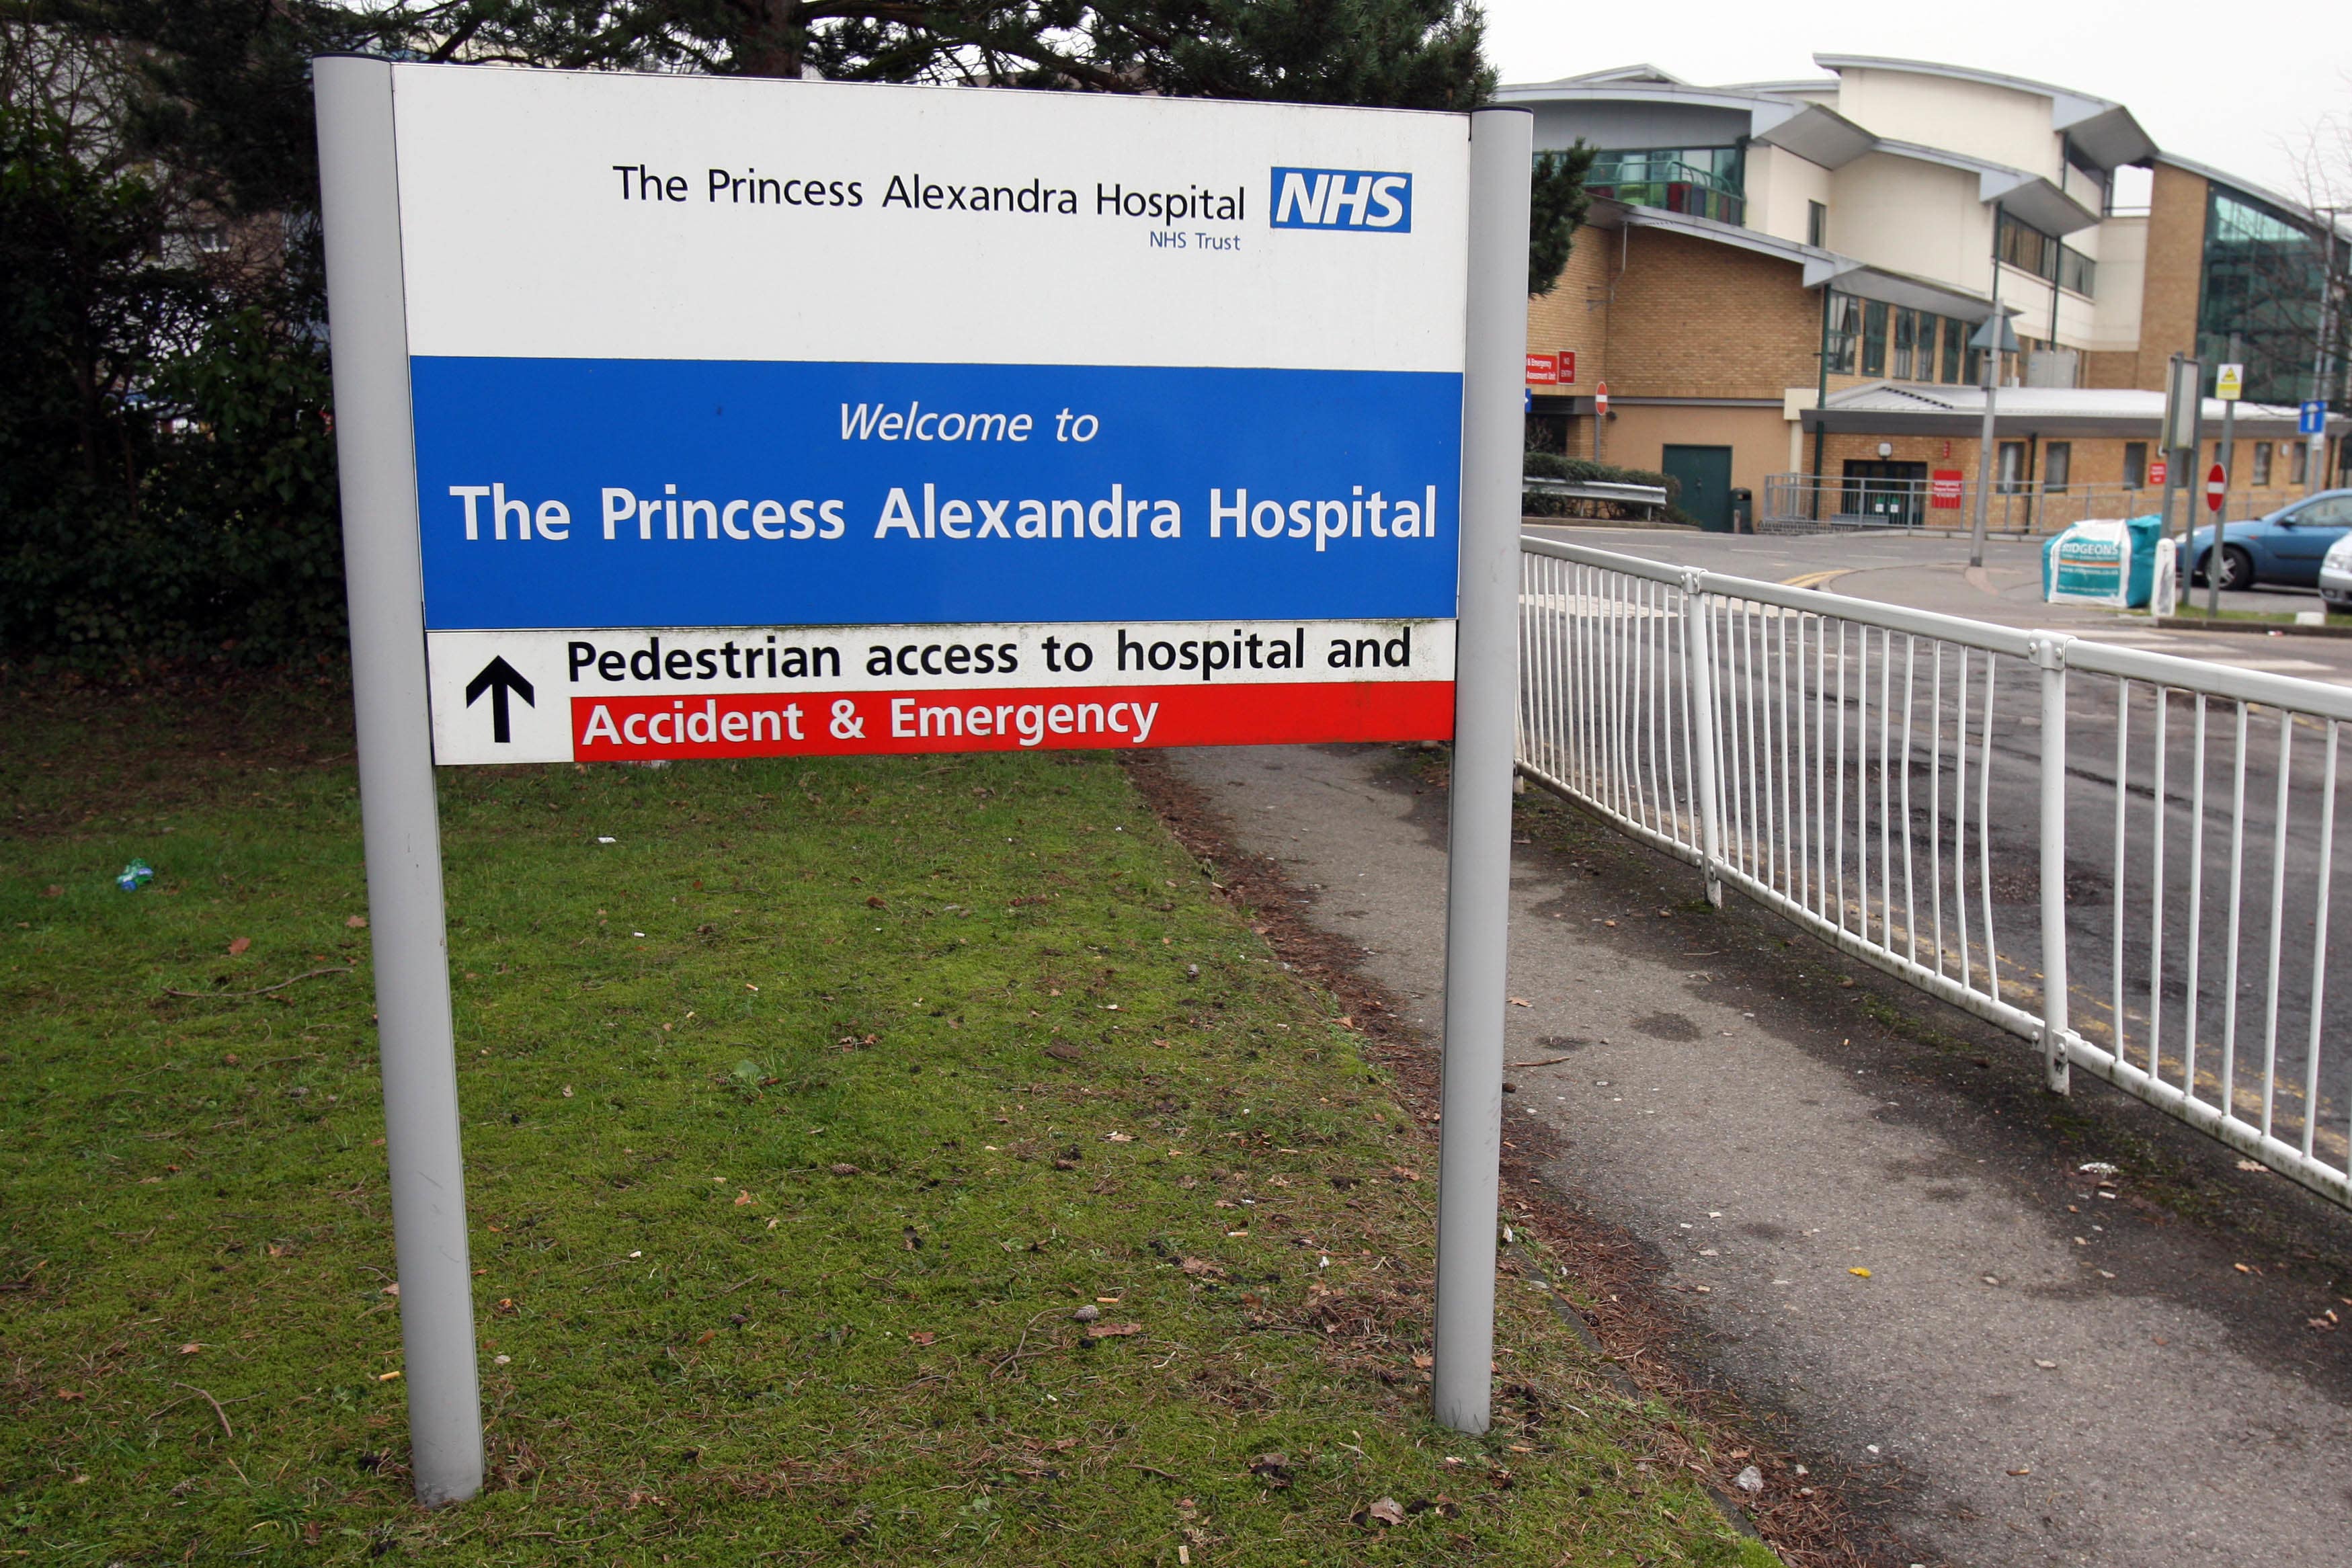 Kar Hao Teoh worked at the Princess Alexandra Hospital in Harlow, Essex